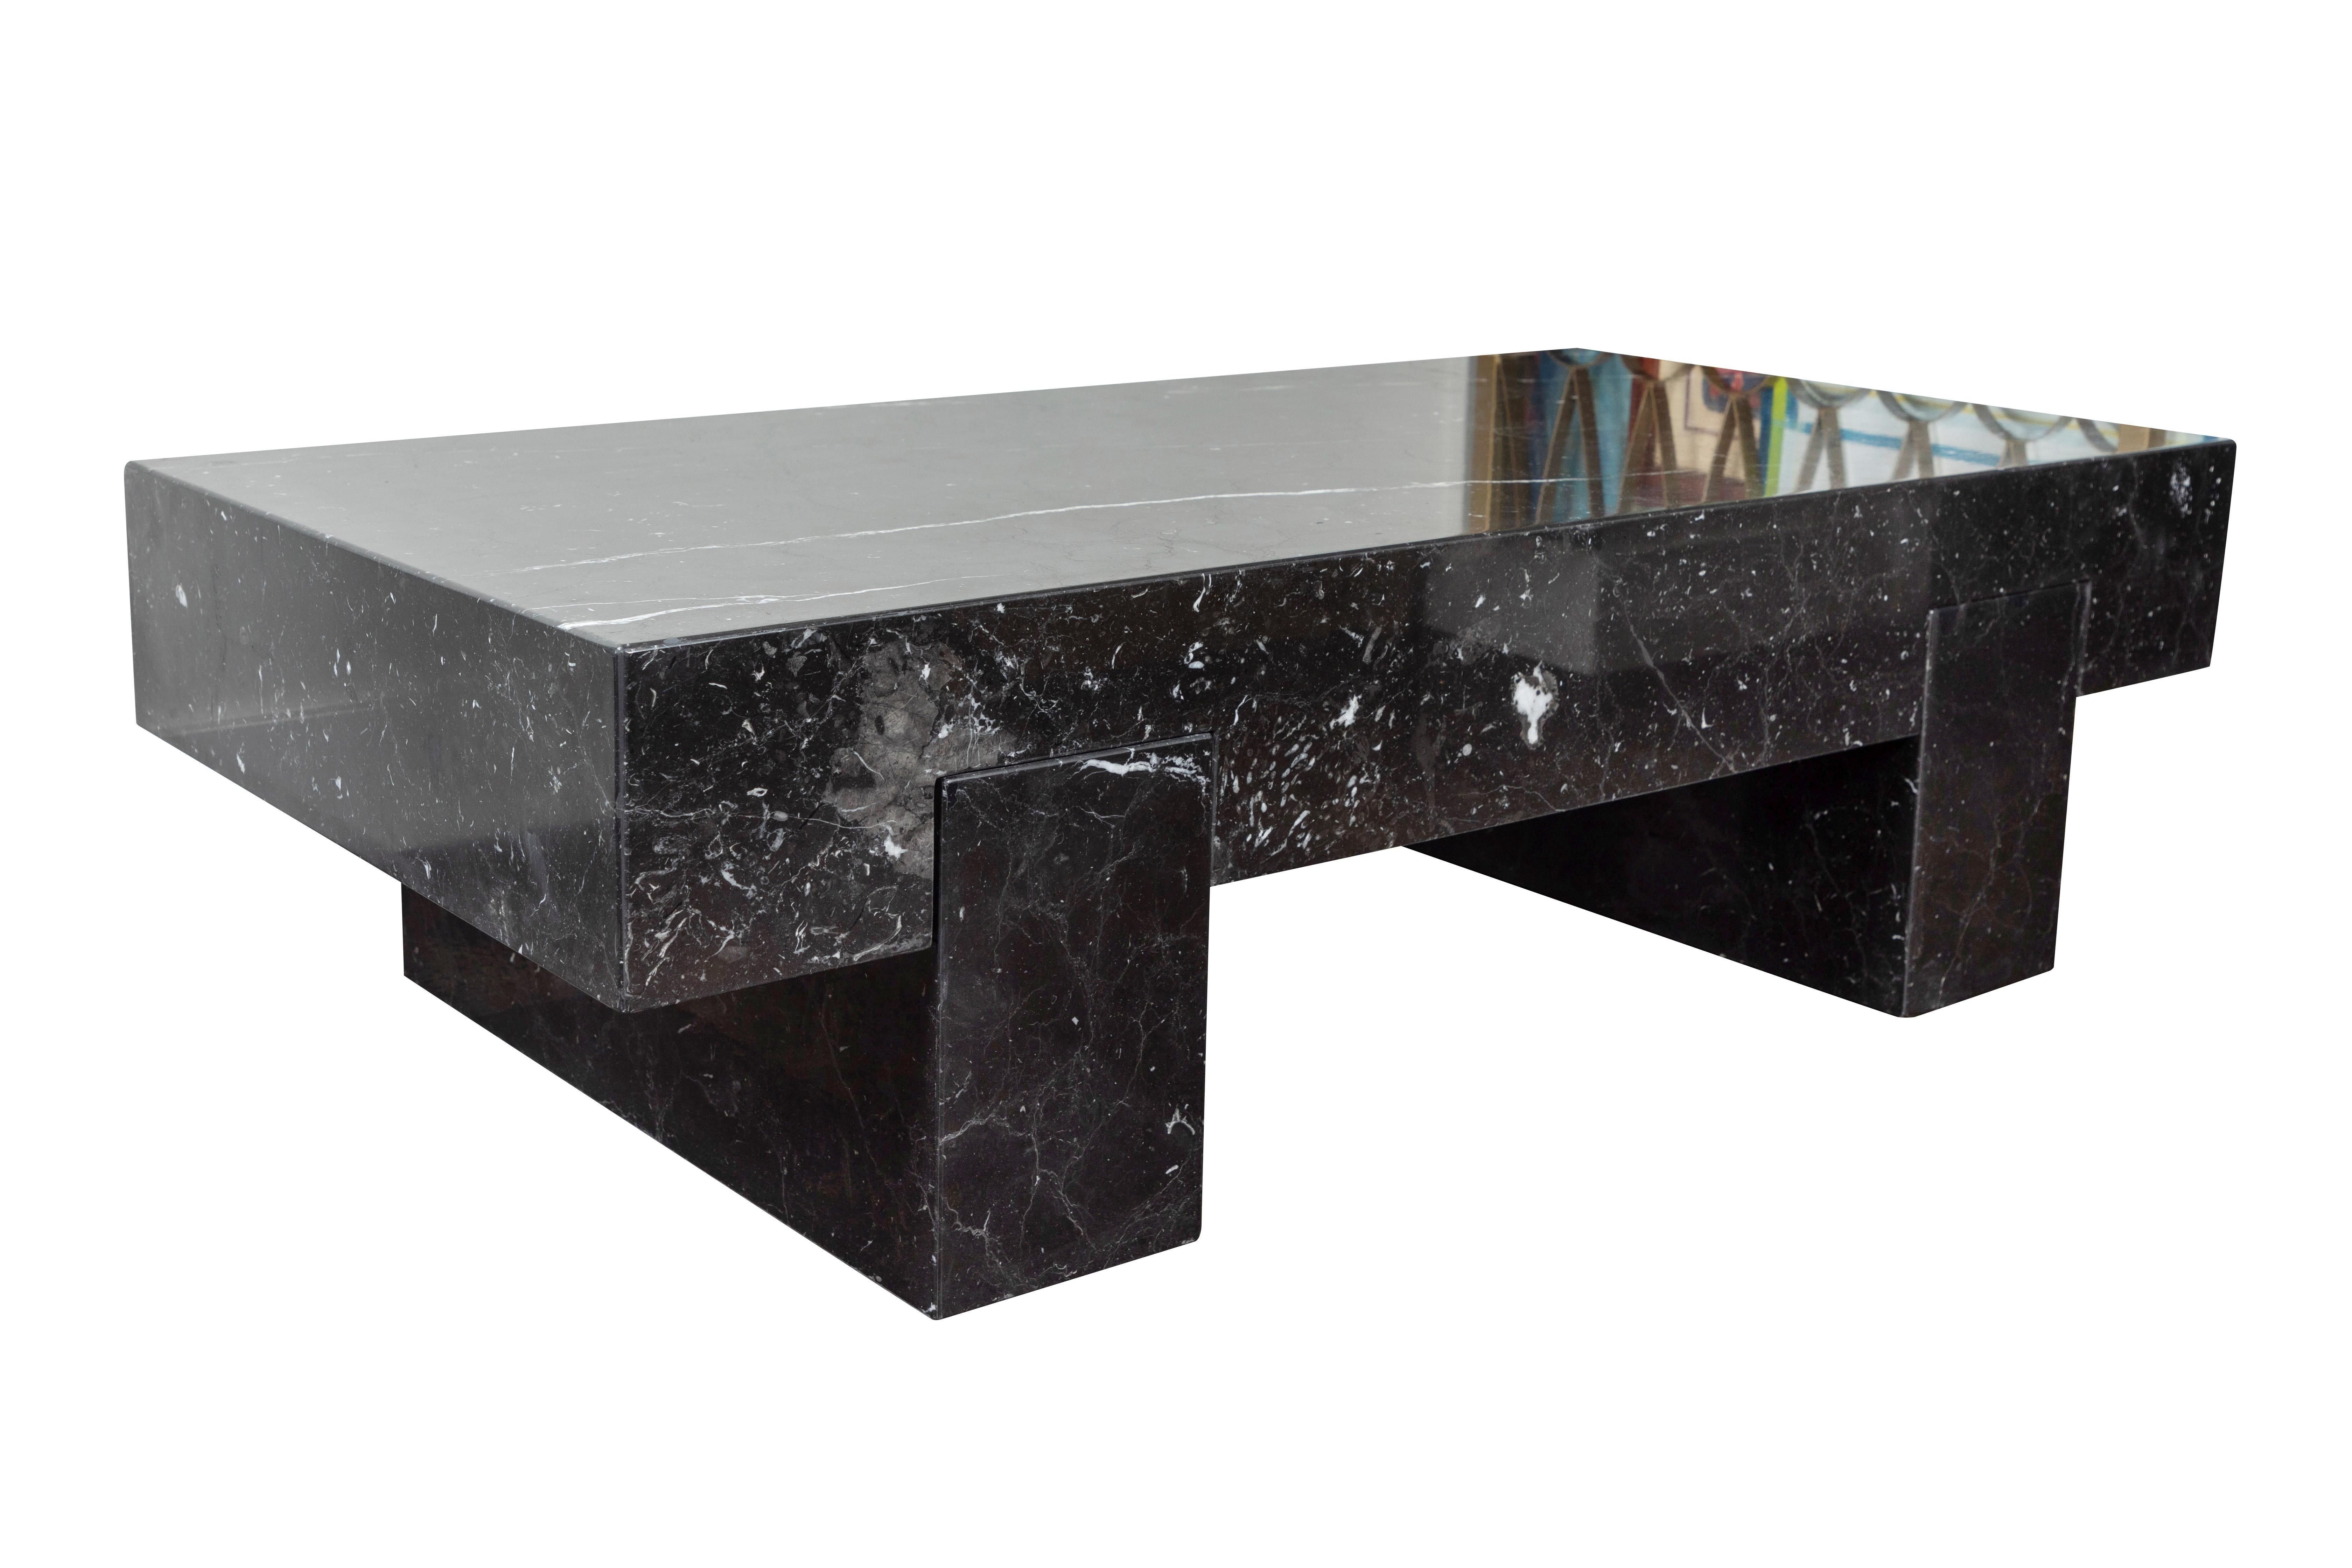 Massive, sleek coffee table in Nero Marquina marble, made in Italy, 1980s. Table is constructed of a top portion with slots that set upon two slab legs. Excellent condition, professionally polished.